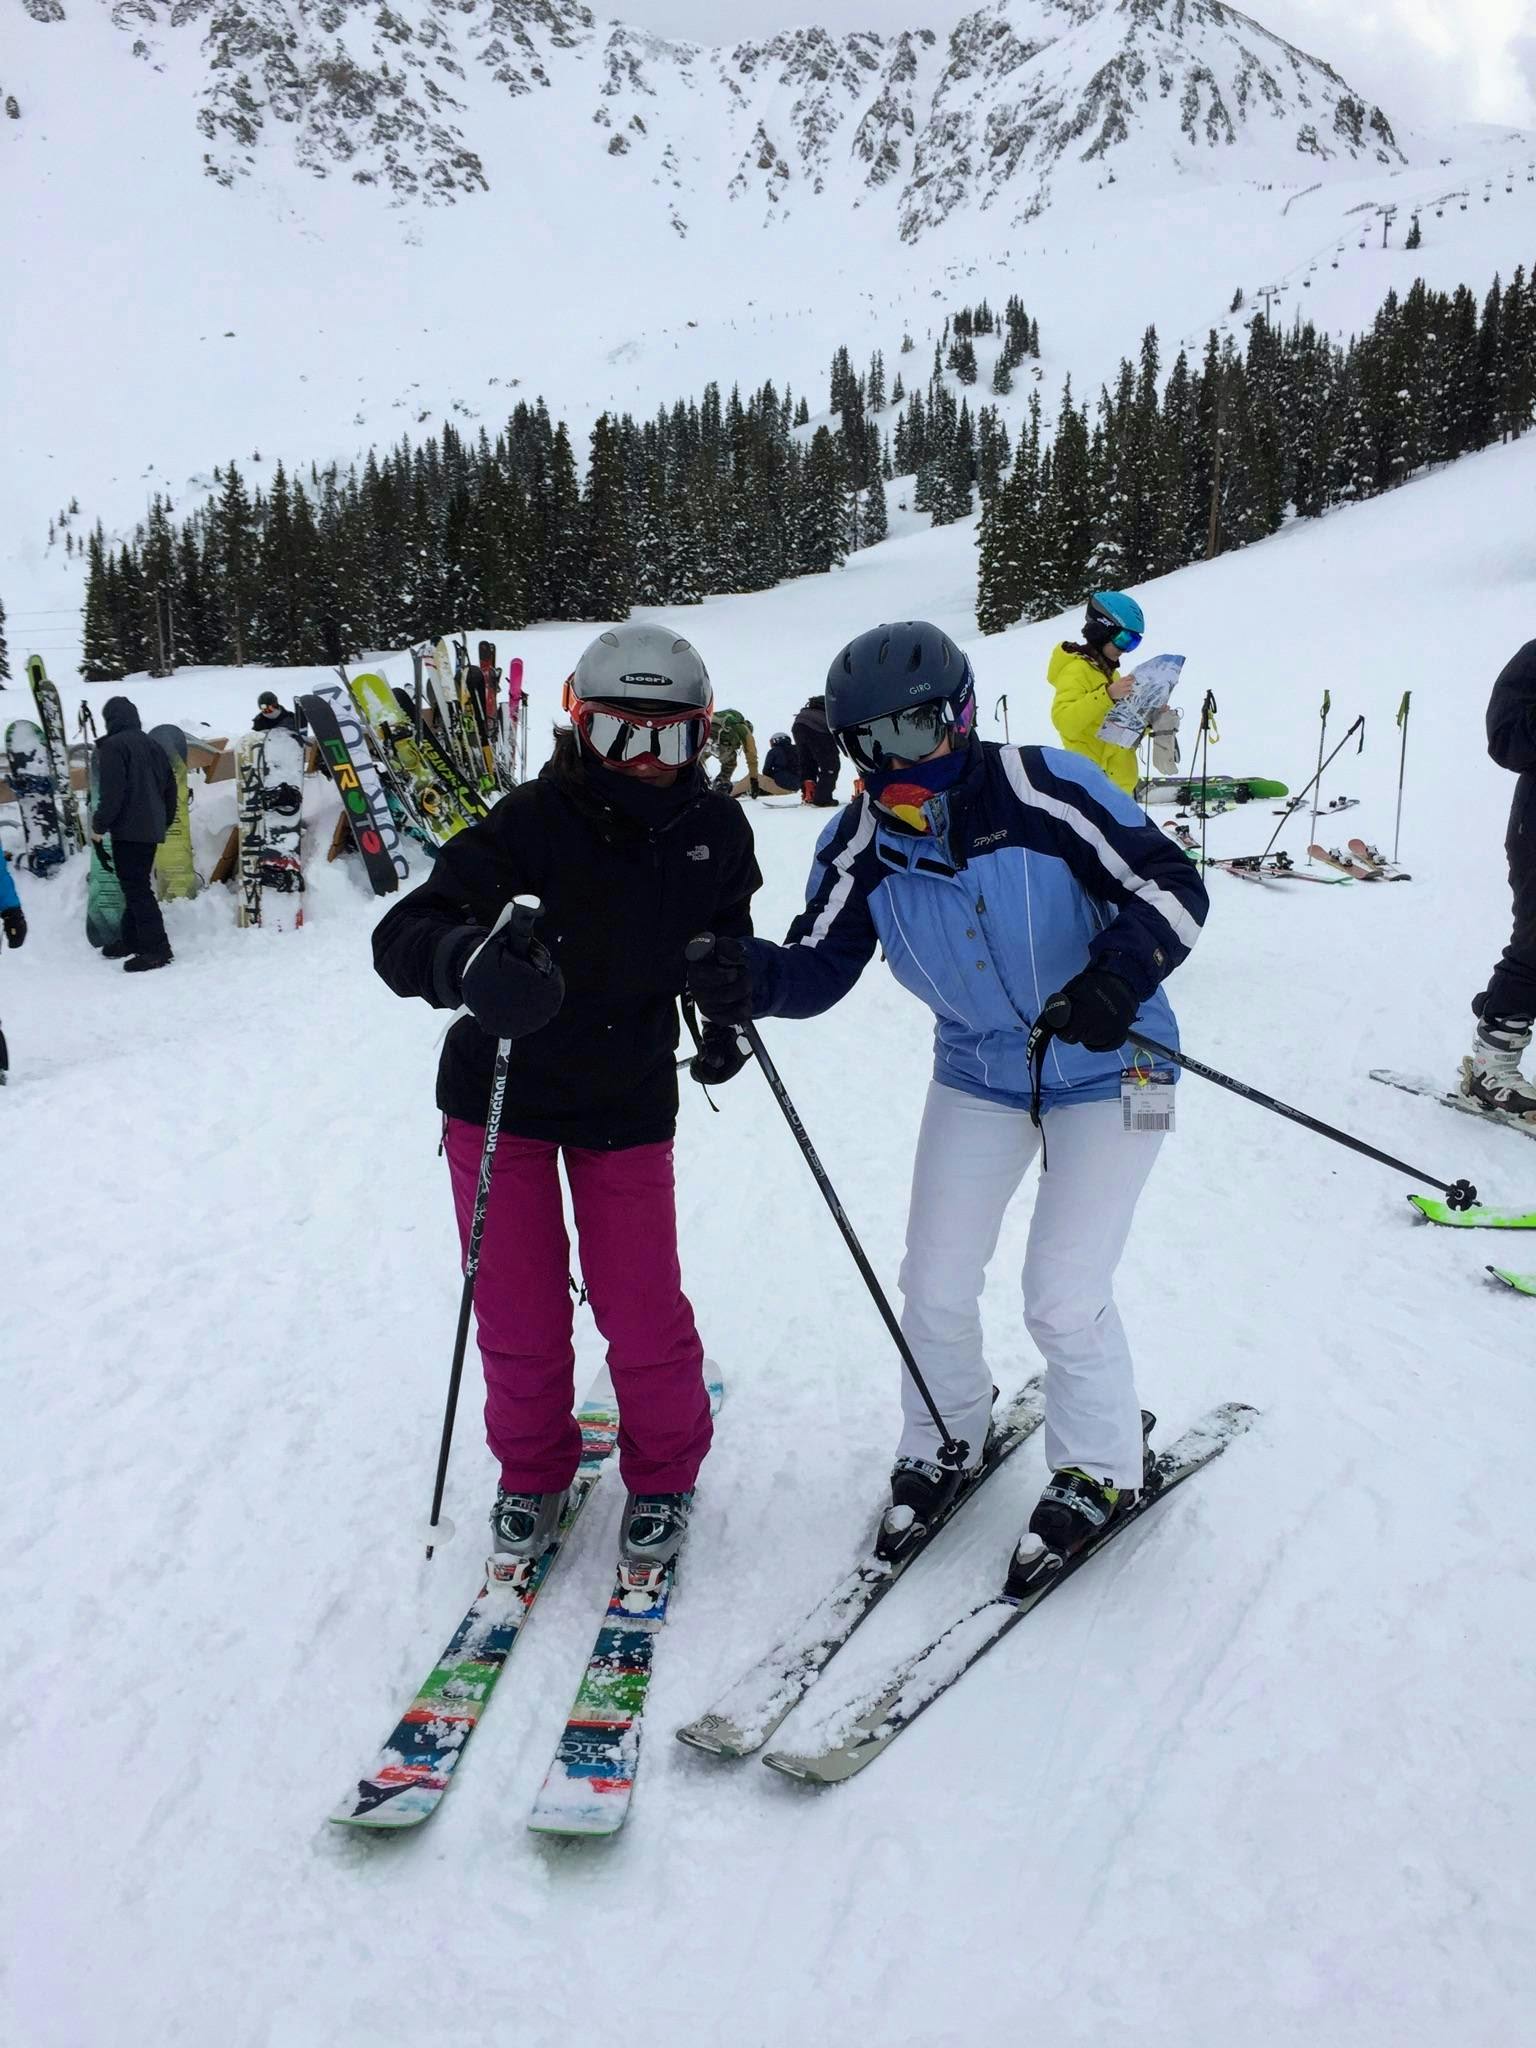 Two skiers standing on a ski run. There is a snowy mountain in the background.